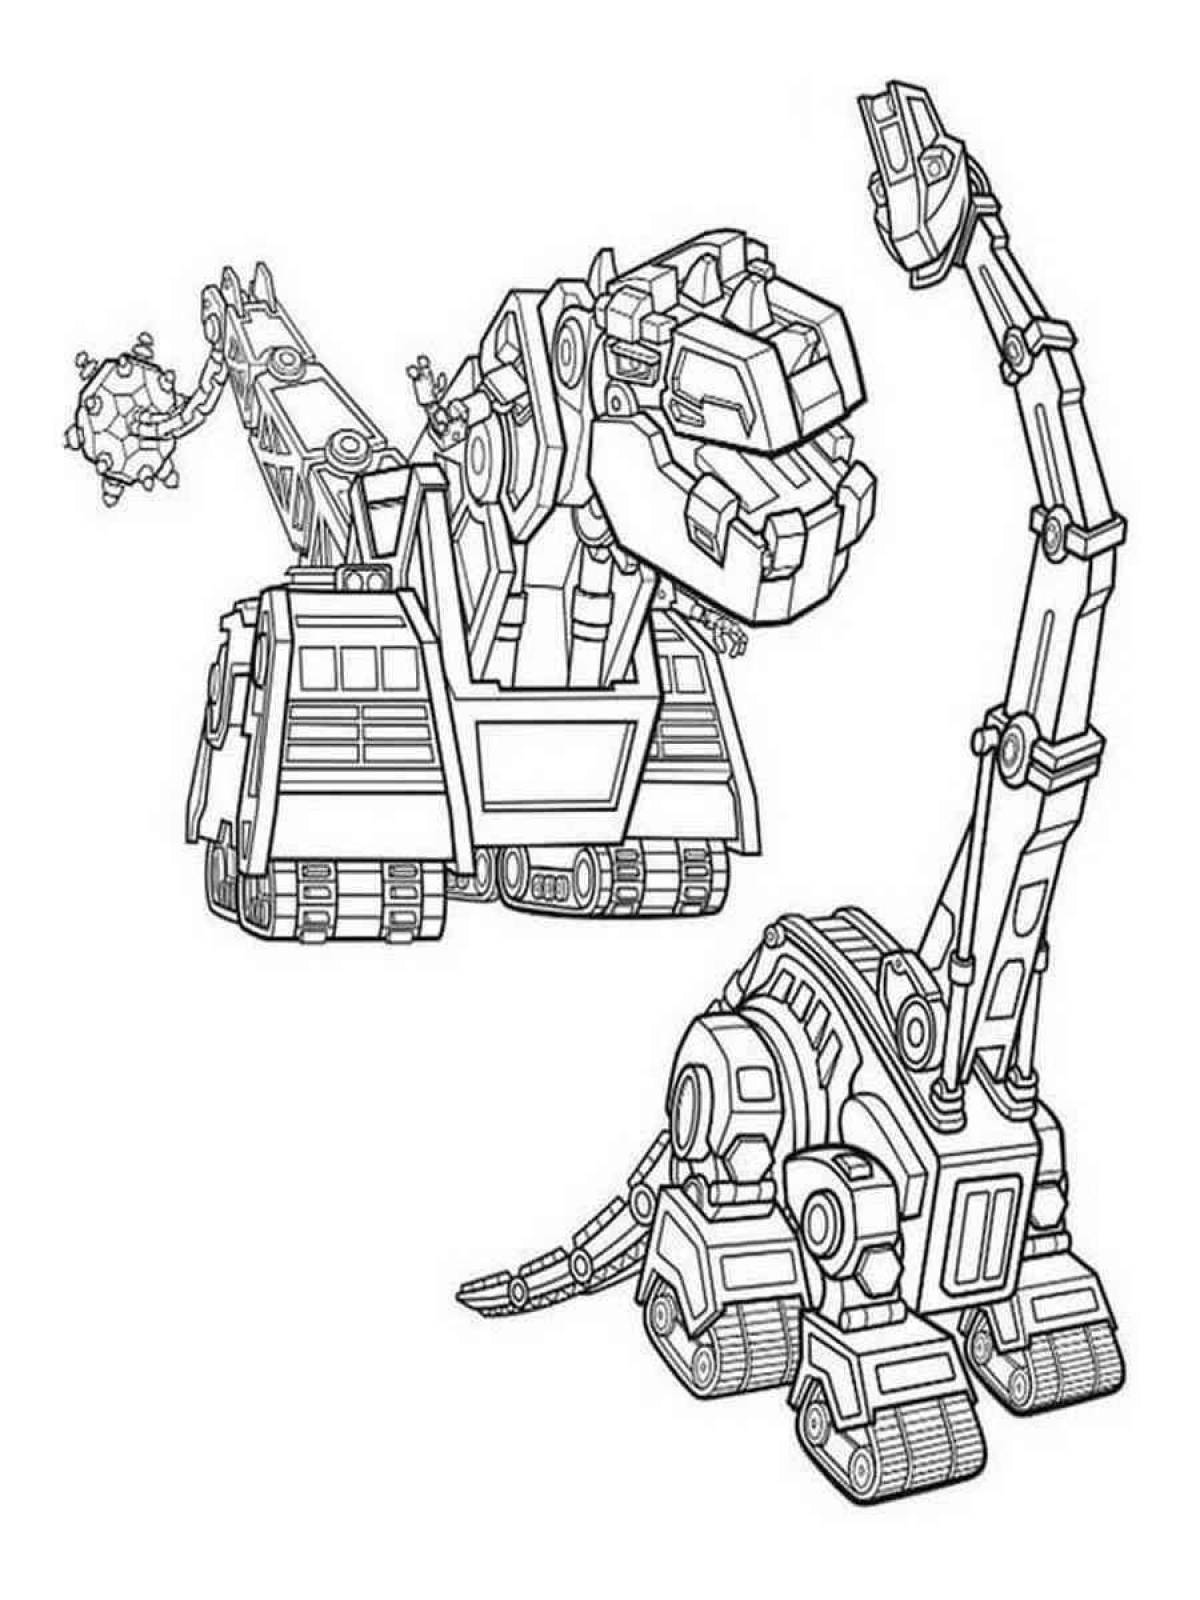 Coloring book exquisite galactic robots